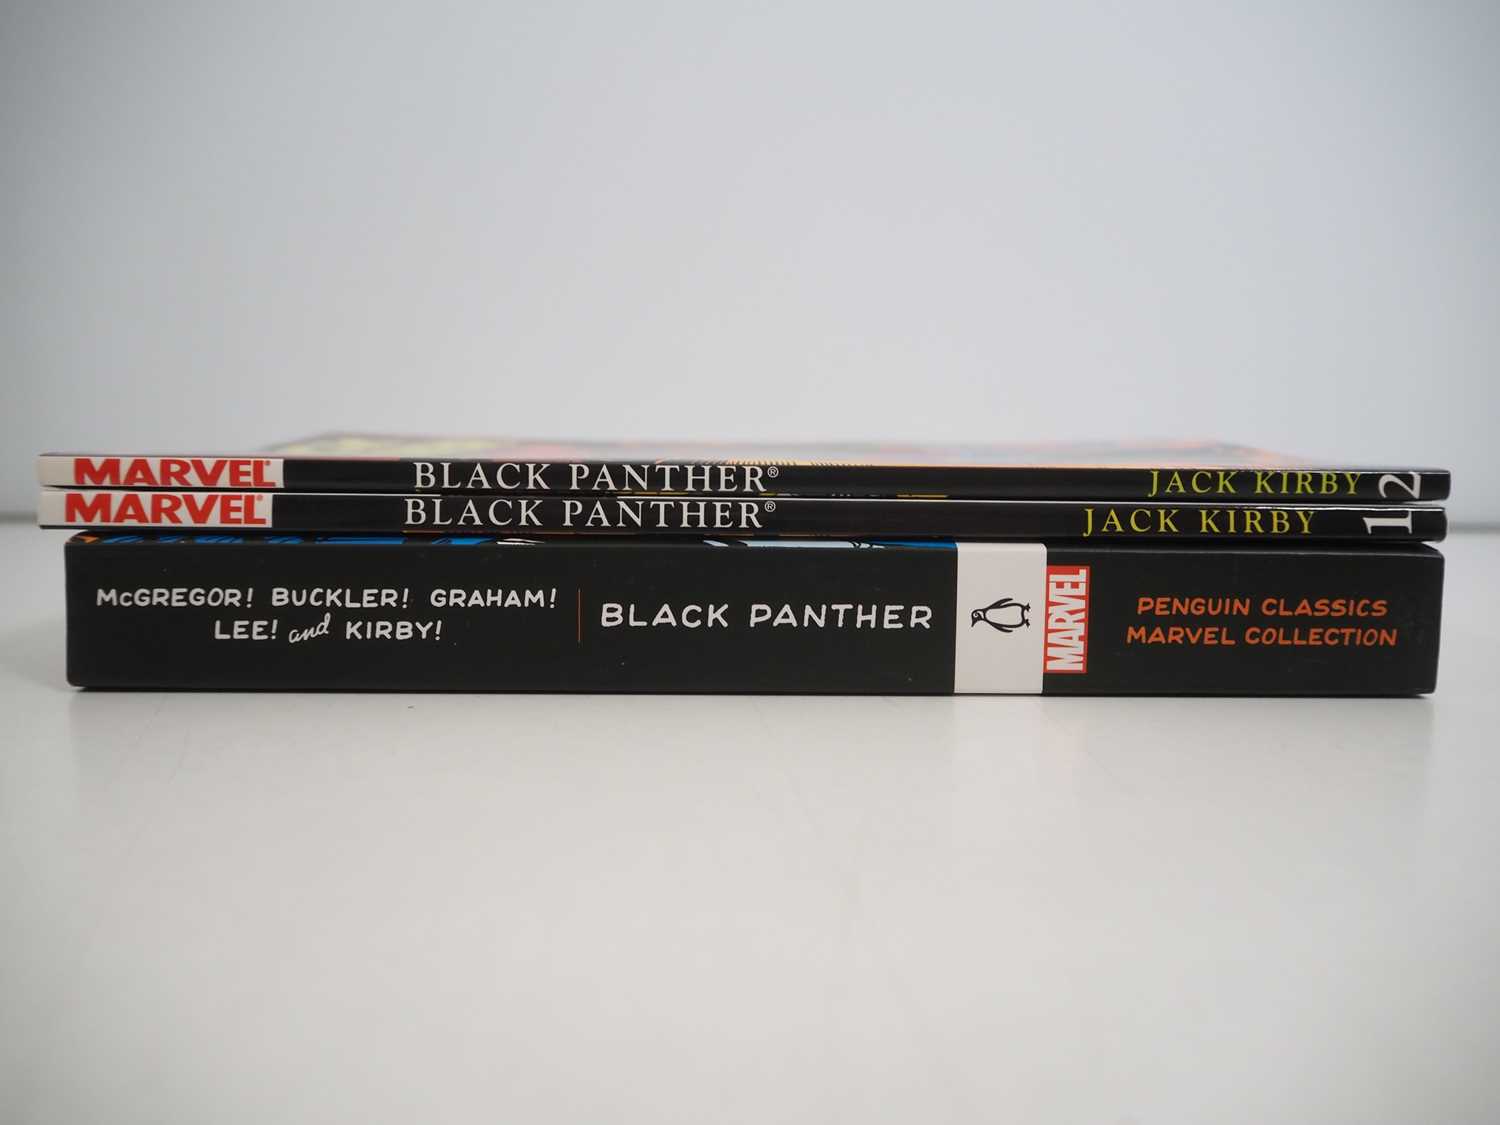 BLACK PANTHER TRADE PAPERBACK LOT (3 in Lot) - Includes BLACK PANTHER (2022 - PENGUIN CLASSICS - Image 3 of 3